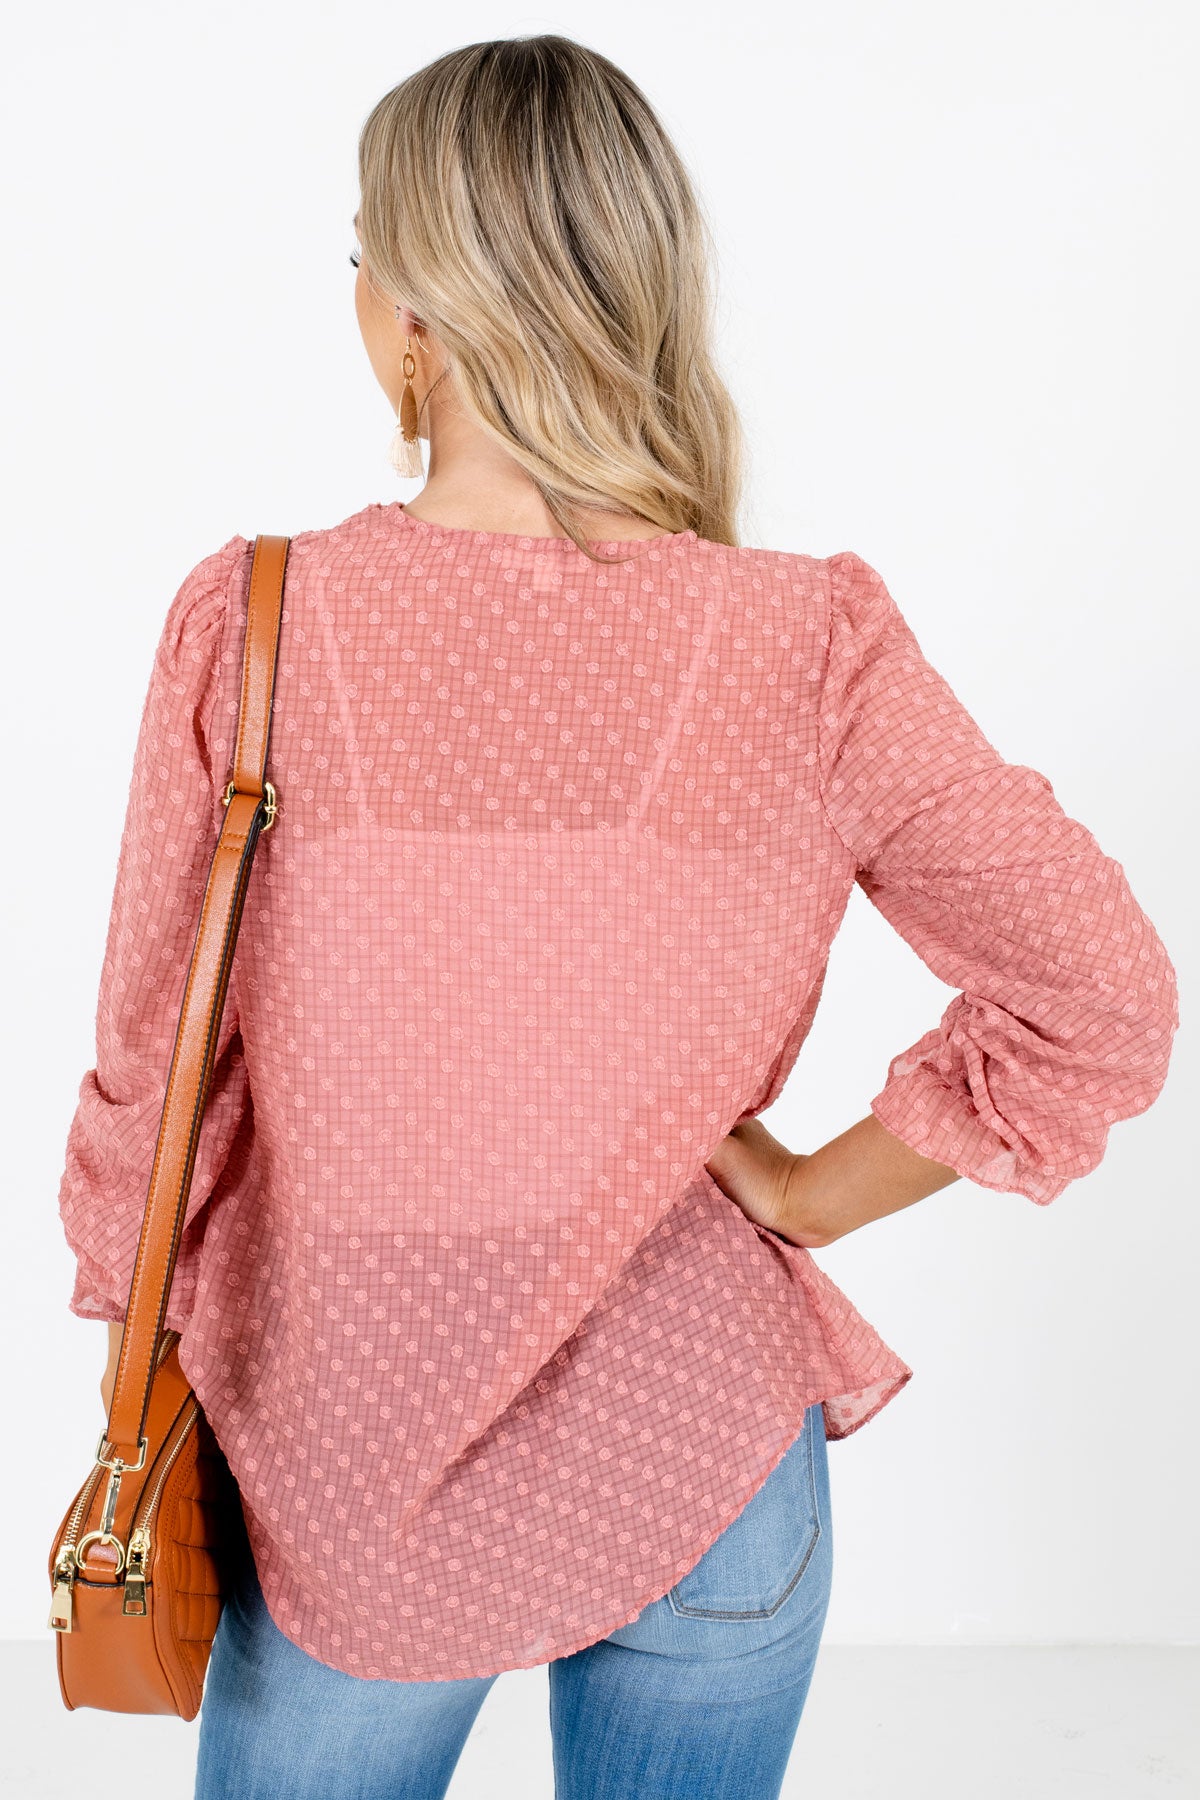 Women's Pink Polka Dot Textured Material Boutique Blouse